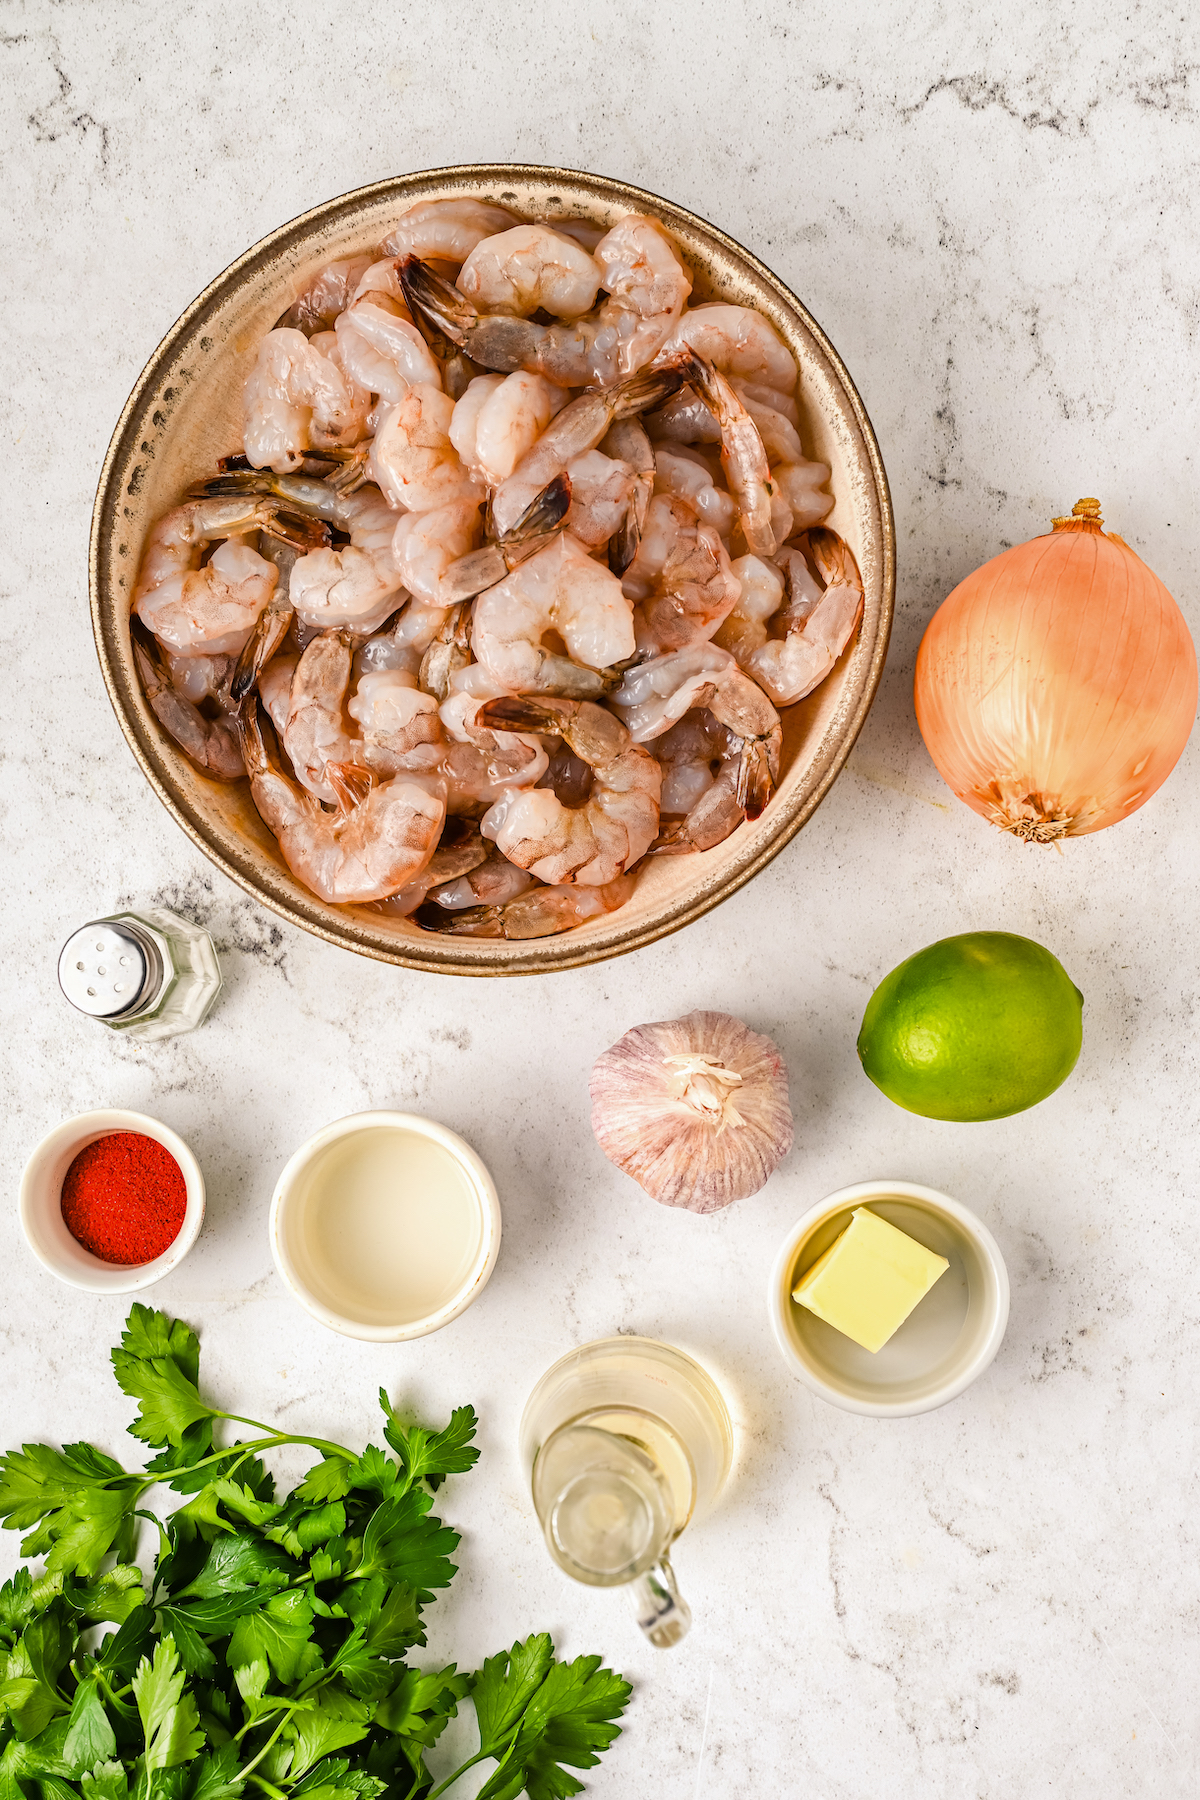 A bowl of raw shrimp, an onion, a lime, a head of garlic, a bowl of butter, a bowl of oil, a jar of vinegar, a bowl of paprika, a salt shaker, and a sprig of parsley